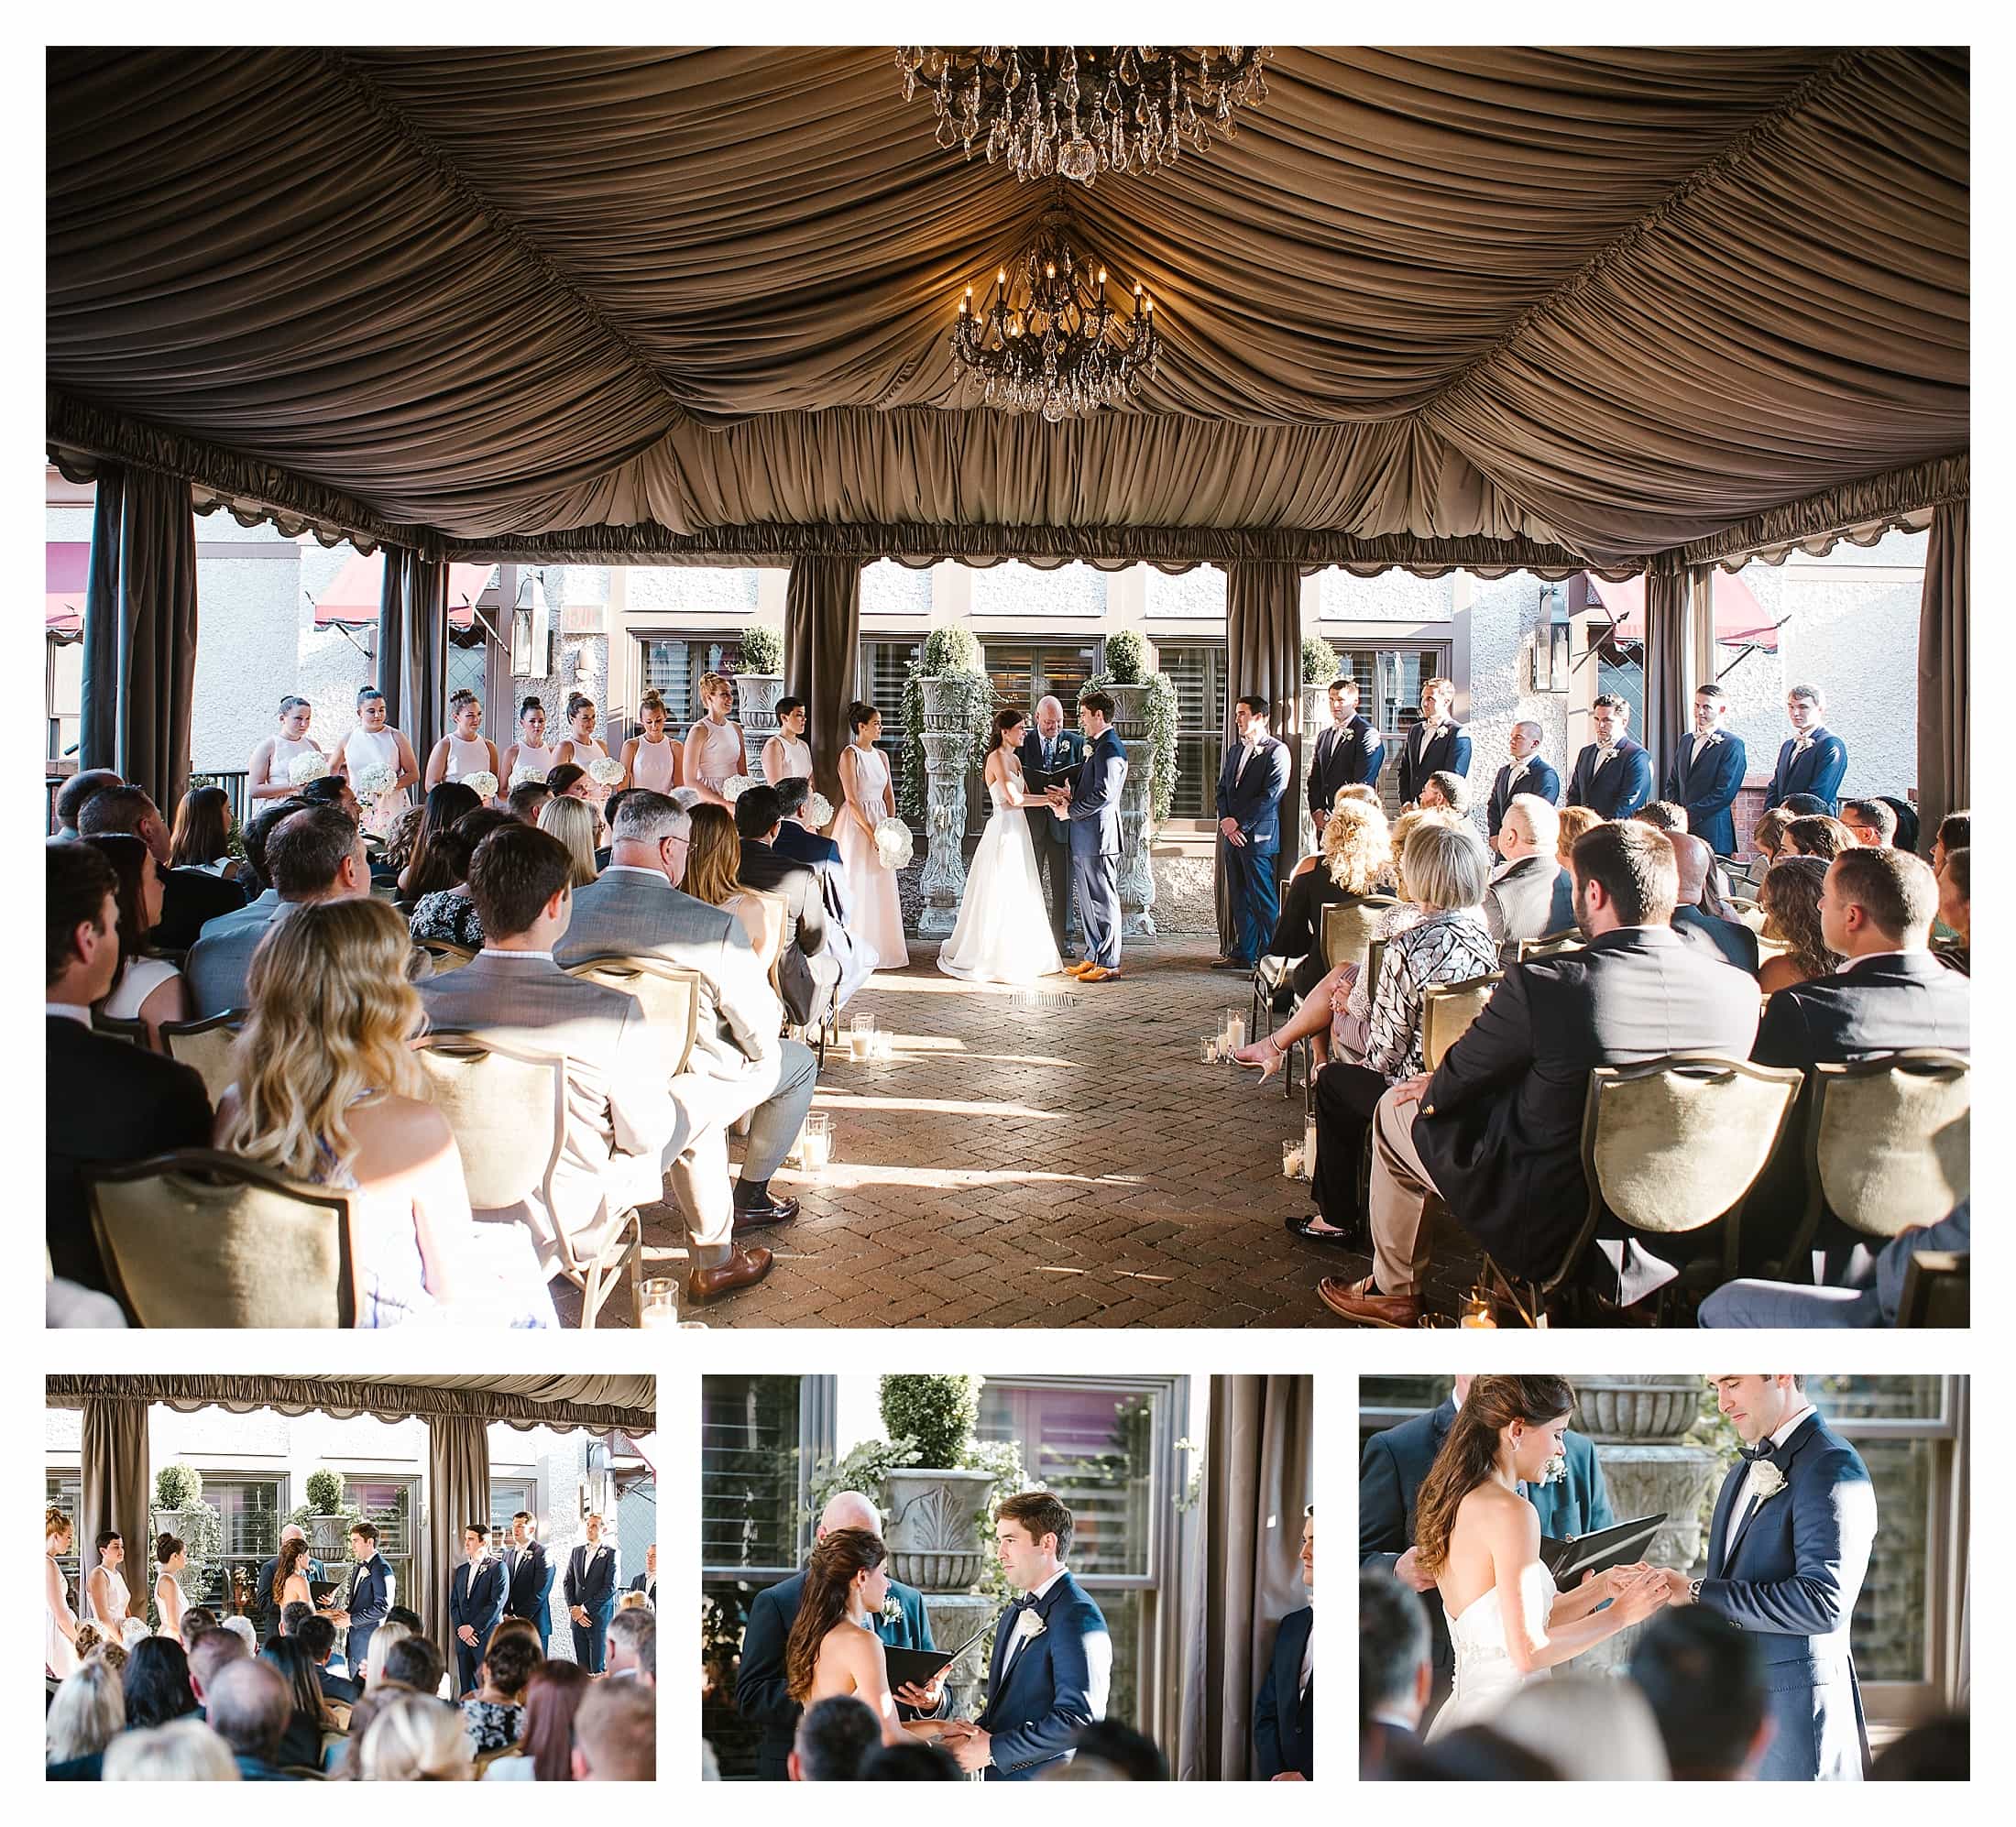 Grand Bohemian Asheville Outdoor elegant covered ceremony area. Wedding pictures by Kathy Beaver.